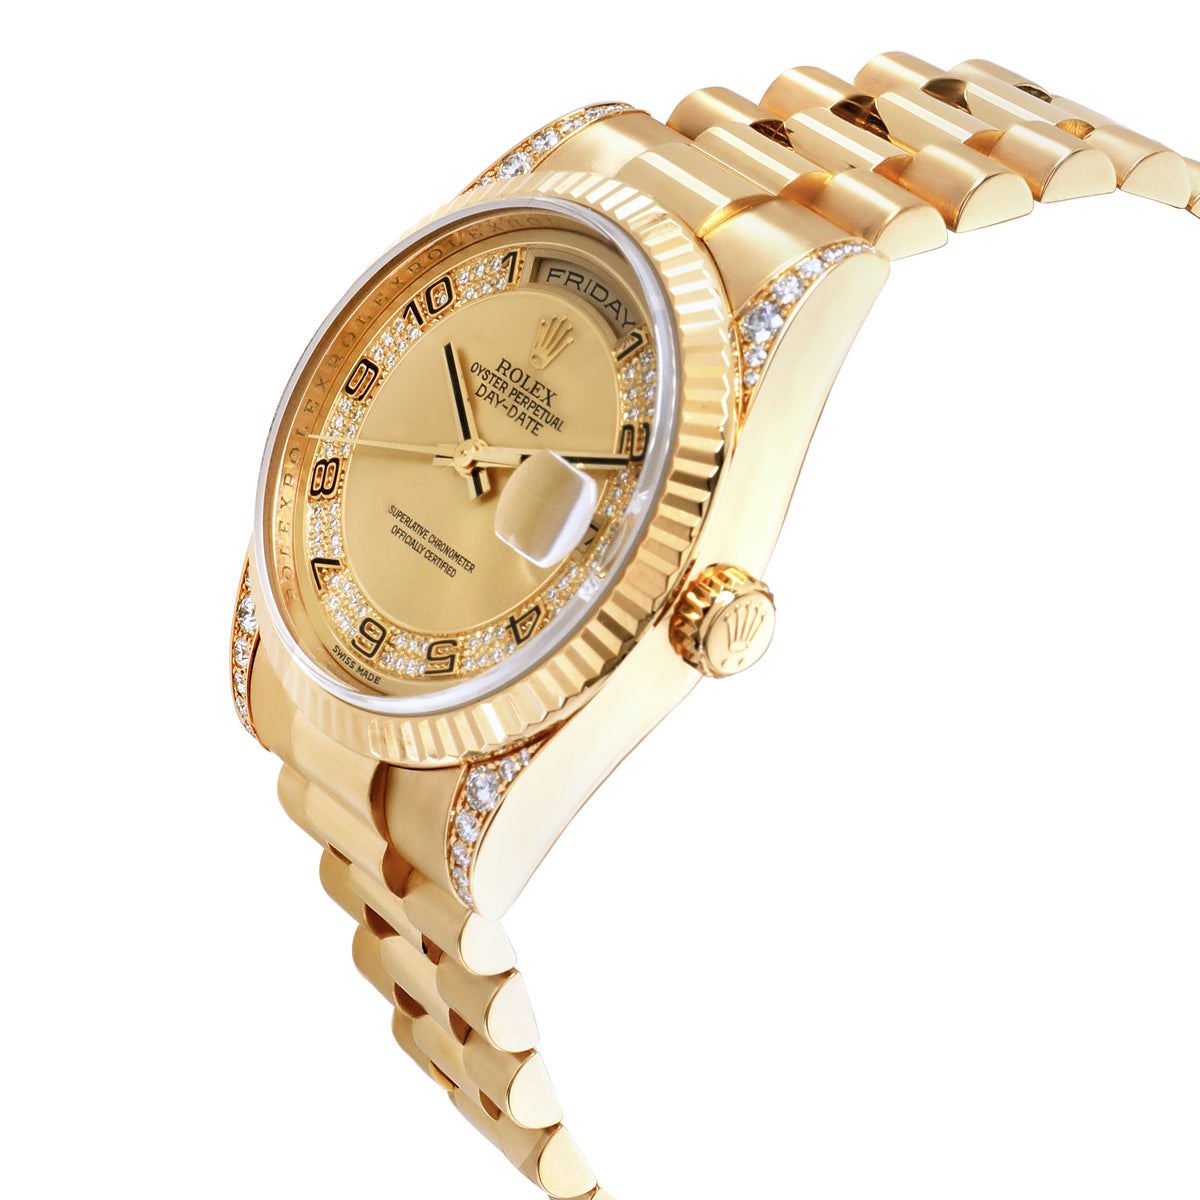 Rolex Day-Date 118338 Men's Watch in 18kt Yellow Gold